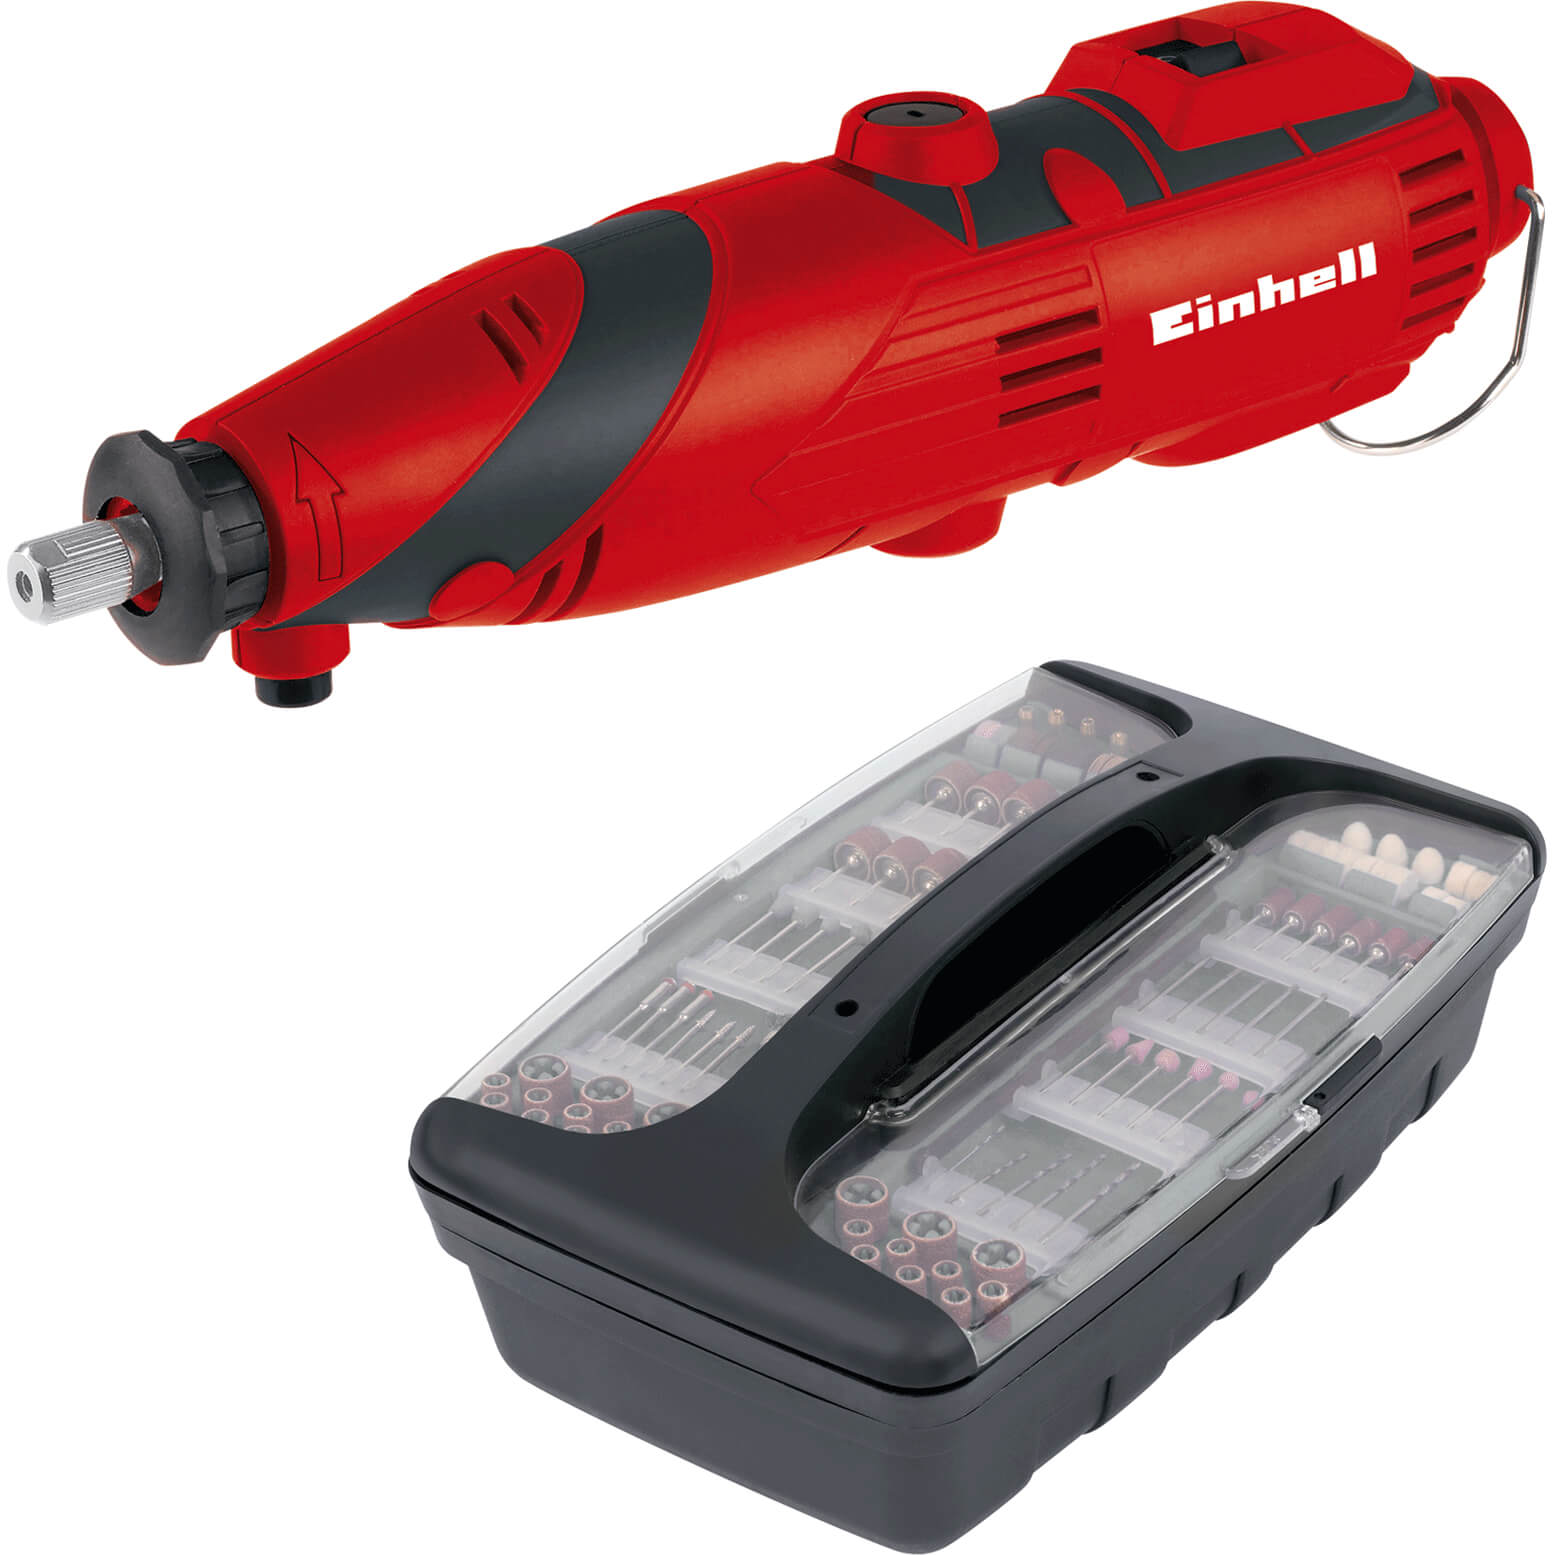 Image of Einhell TC-MG 135 E Grinding and Engraving Rotary Tool Kit 240v